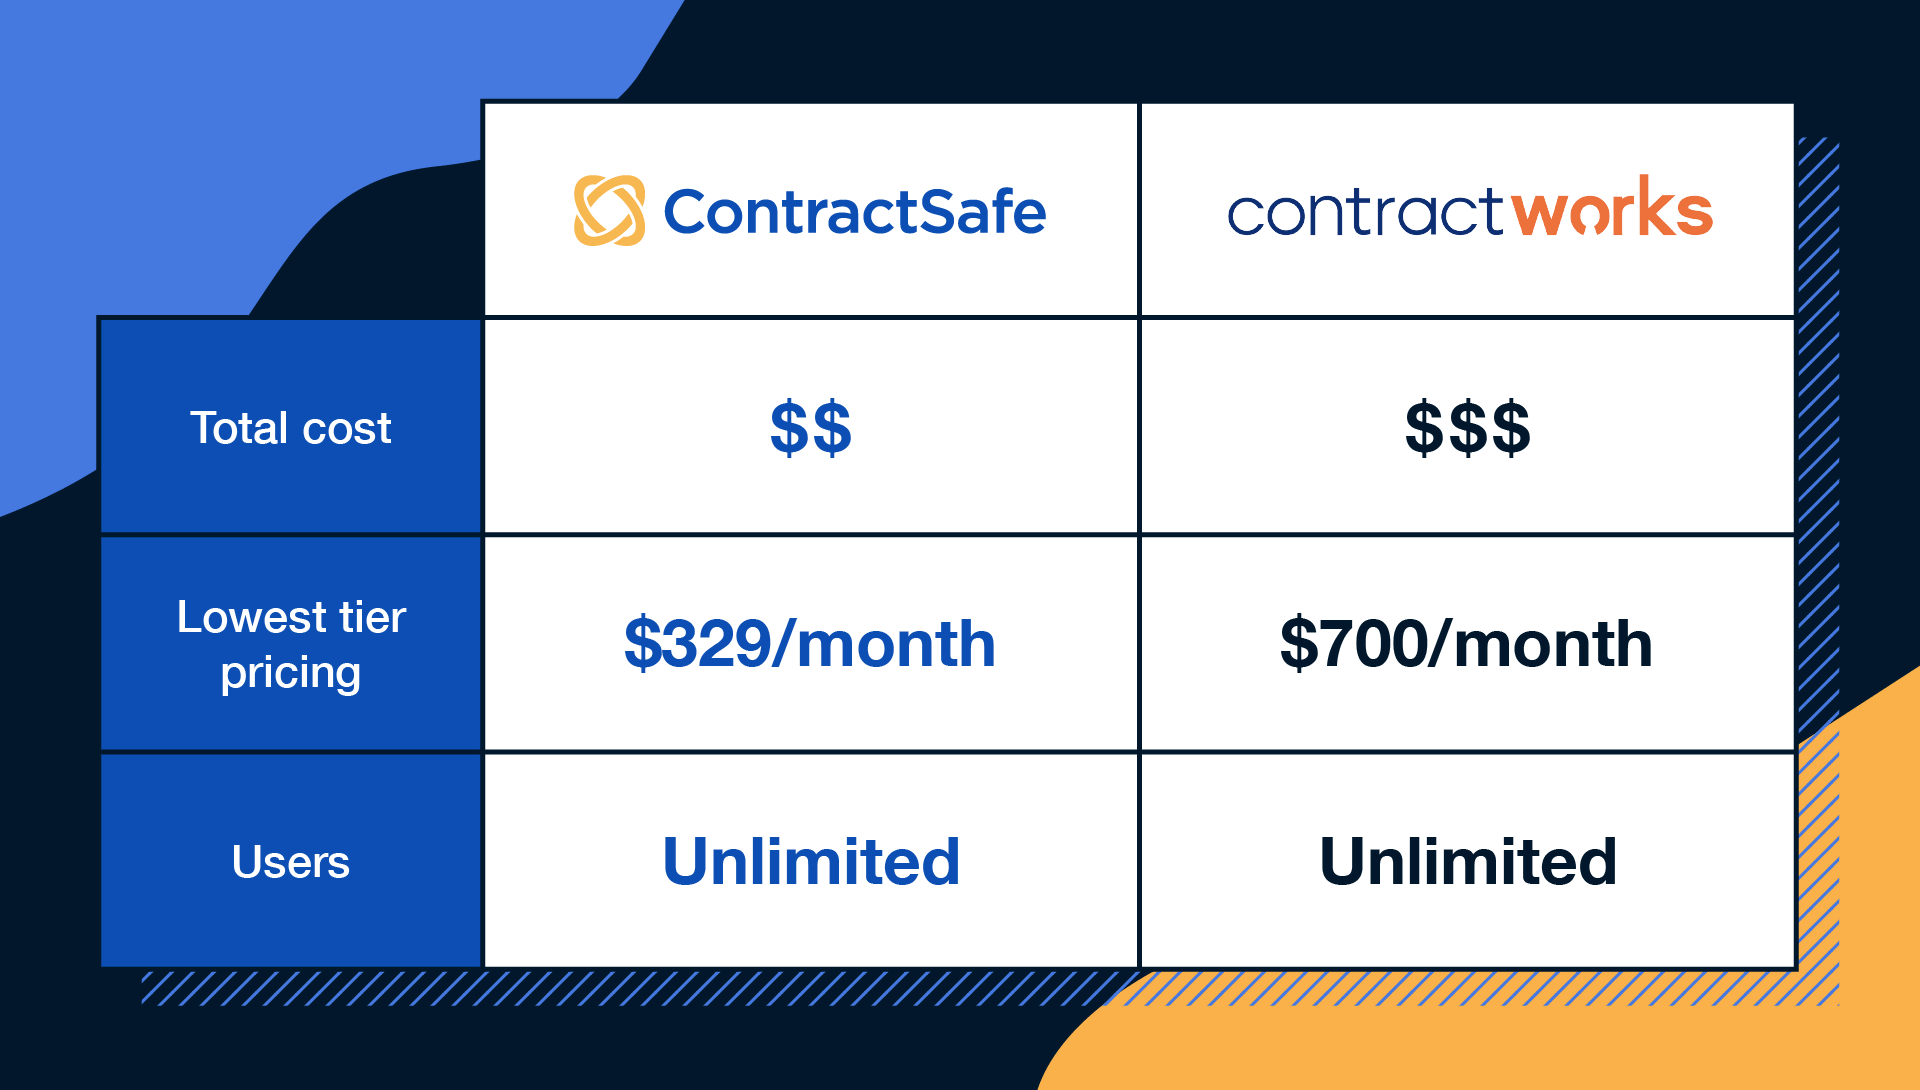 contractsafe-vs-contractworks-costs-1